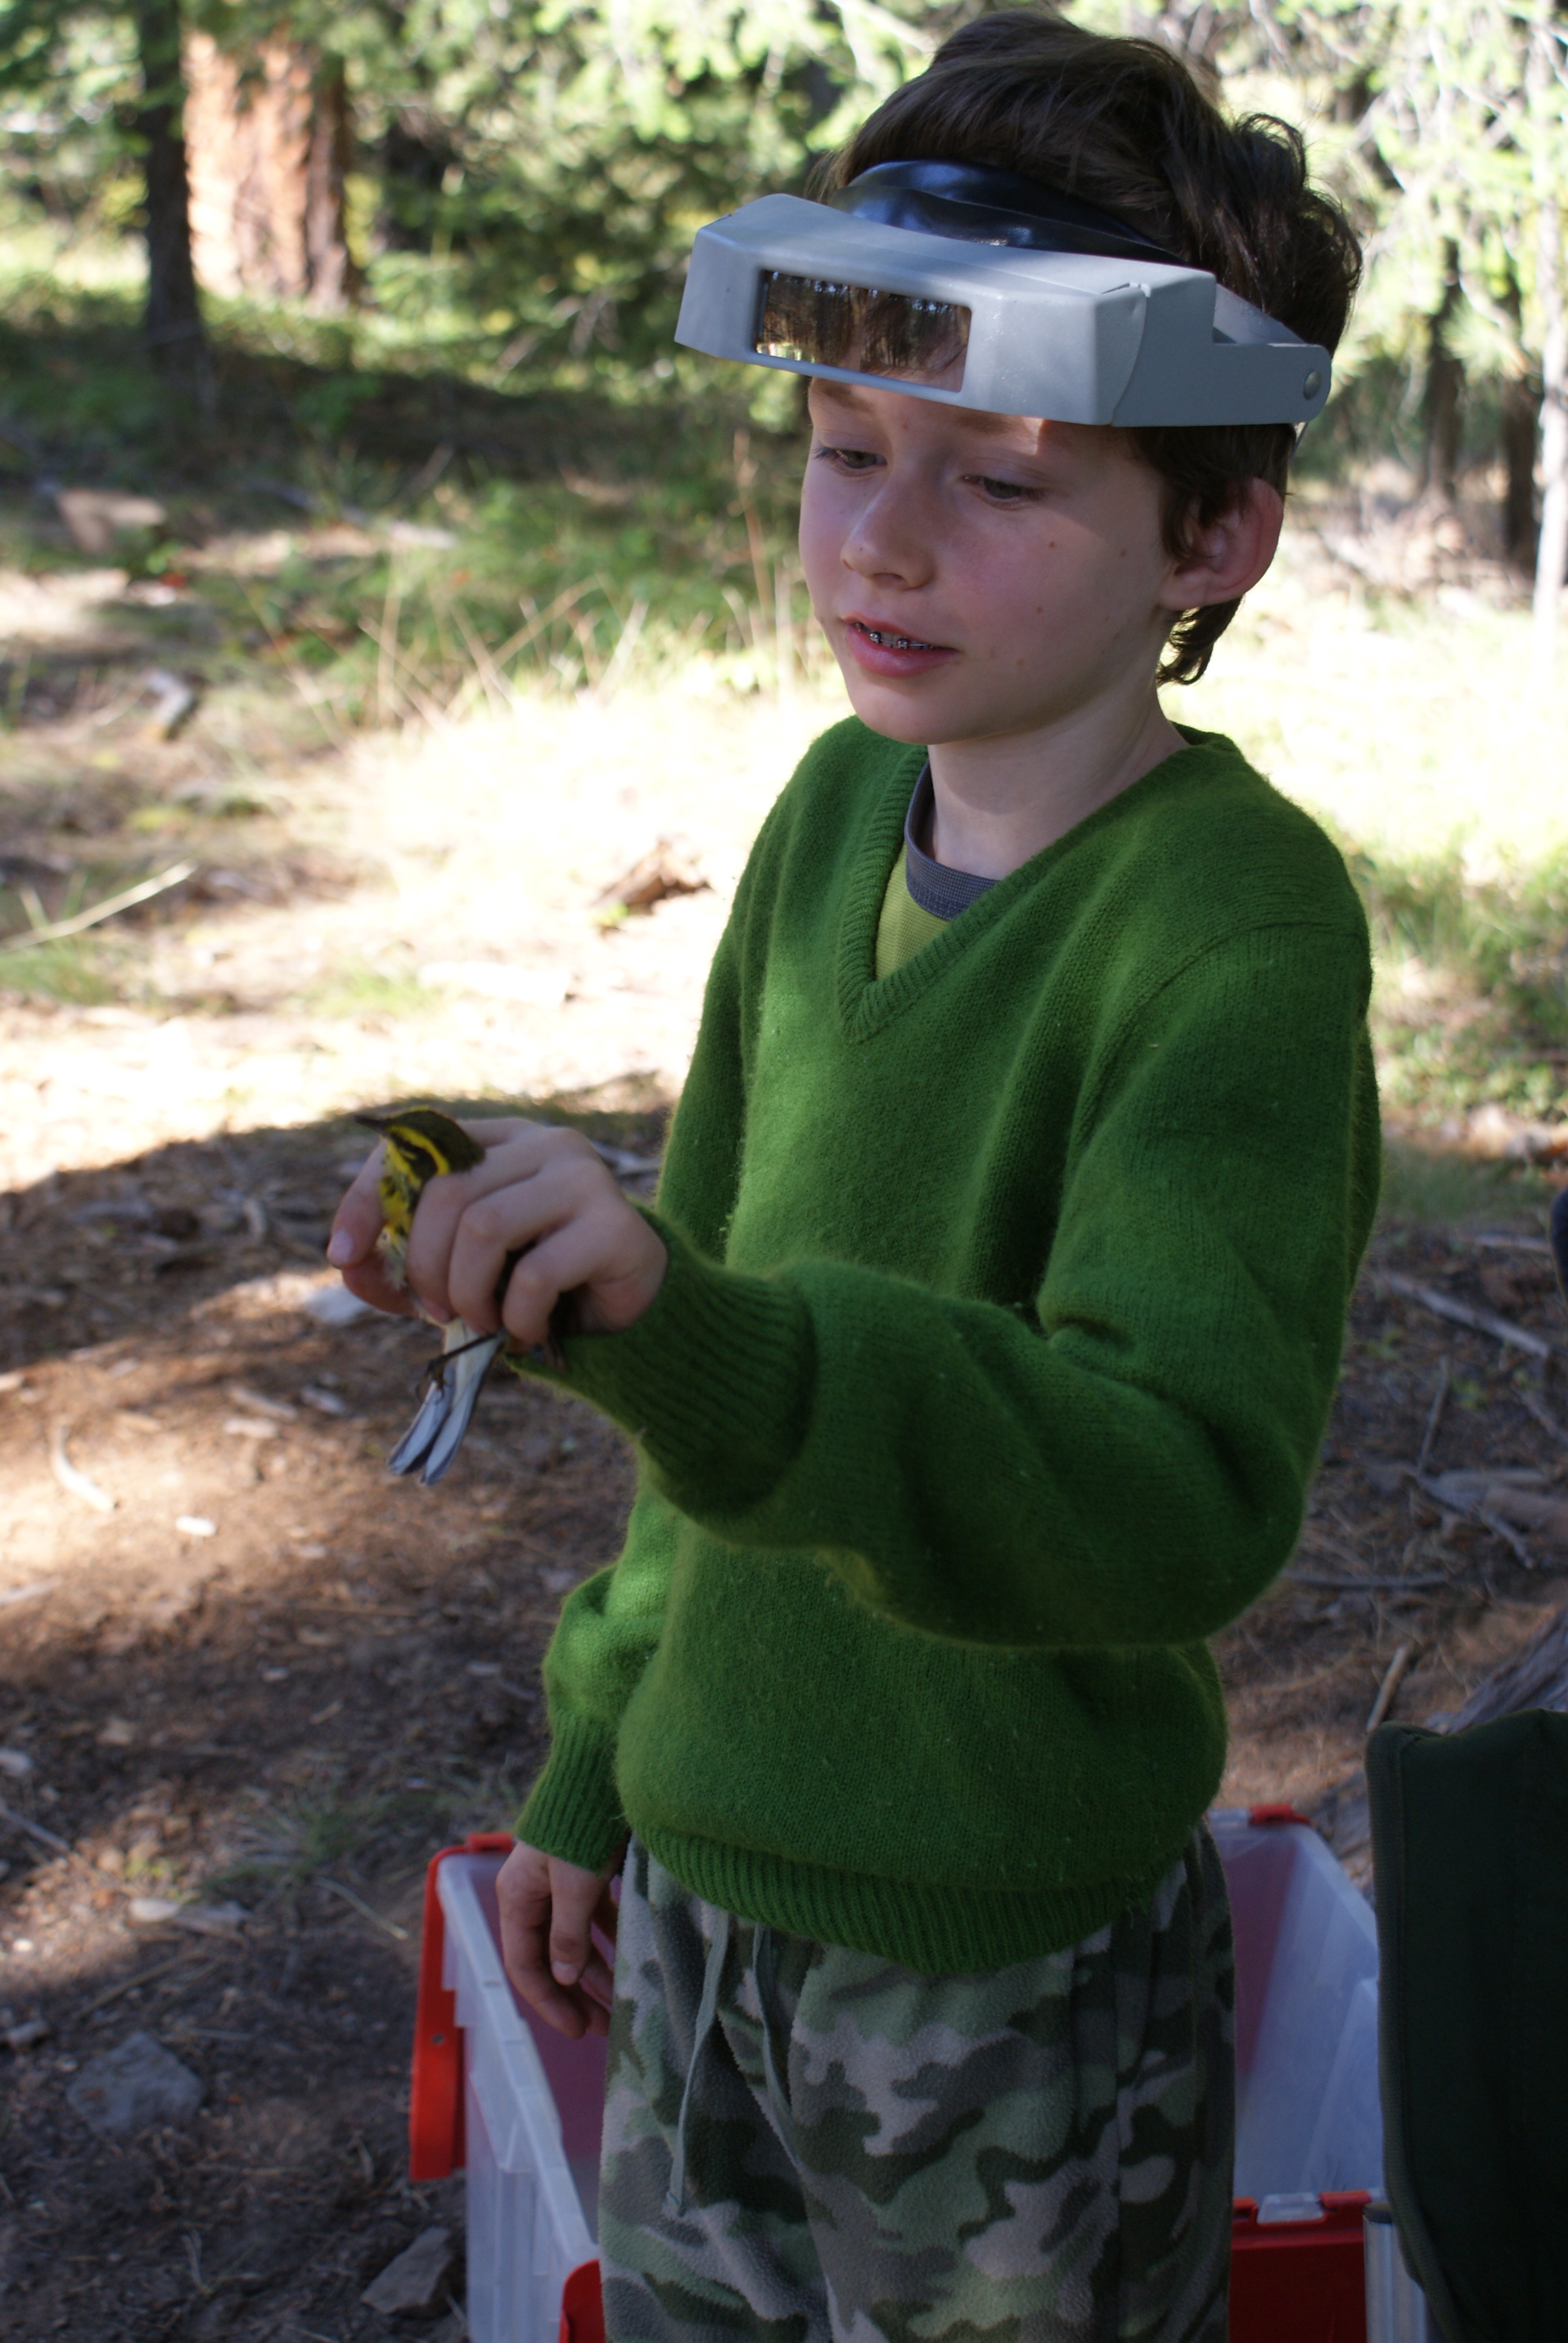 A Weekend with Birds – McDaniel Lake Camping with PSBO